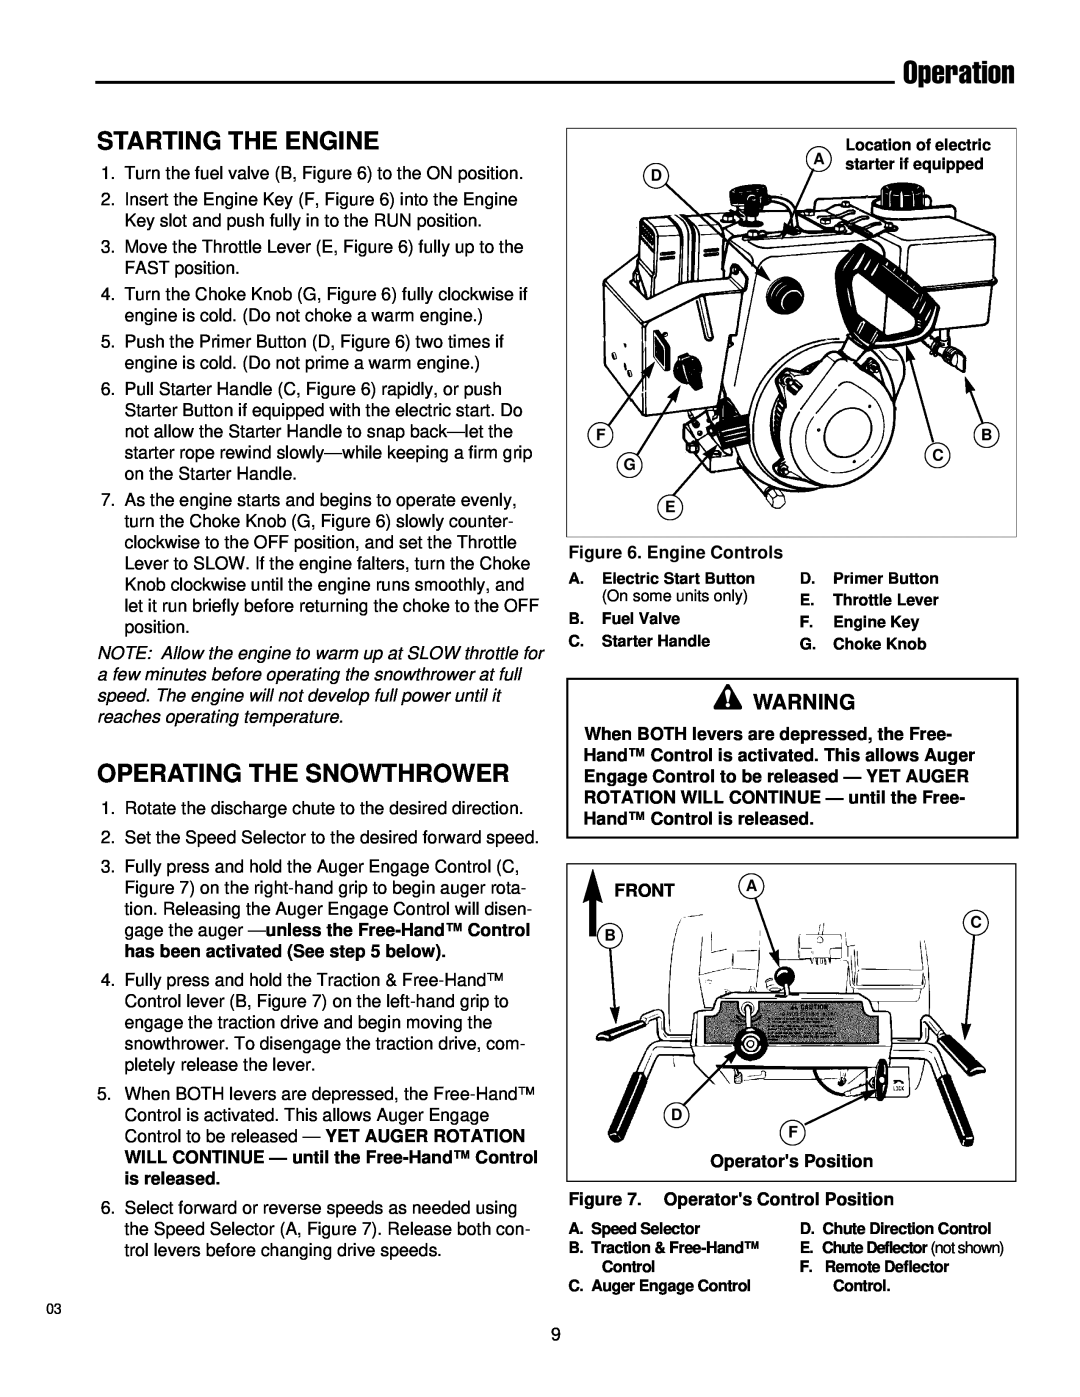 Simplicity 1691948 Starting The Engine, Operating The Snowthrower, Operation, Engine Controls, Front A, Operators Position 